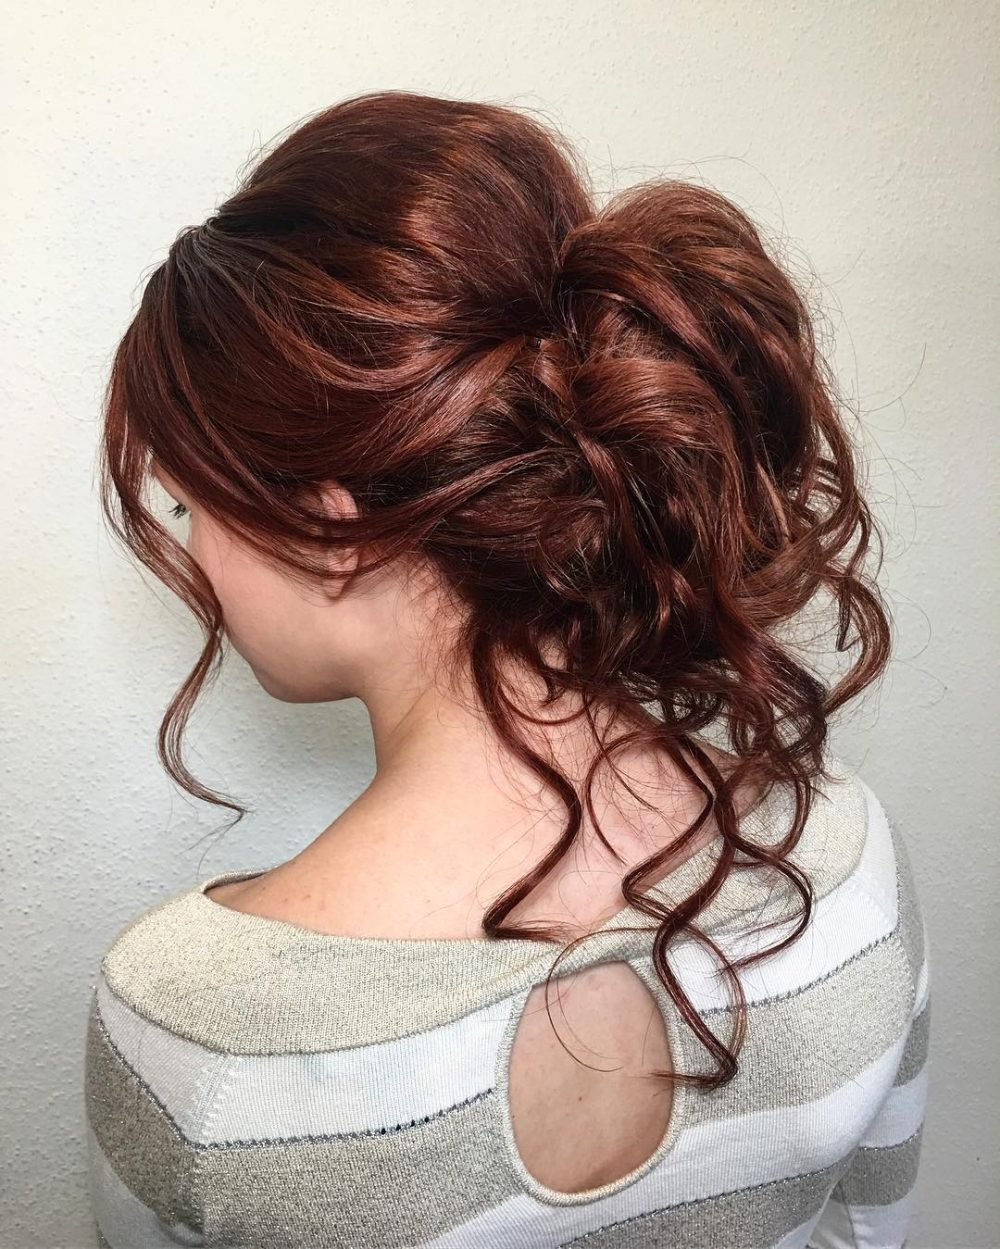 17 Gorgeous Wedding Updos You Have to See